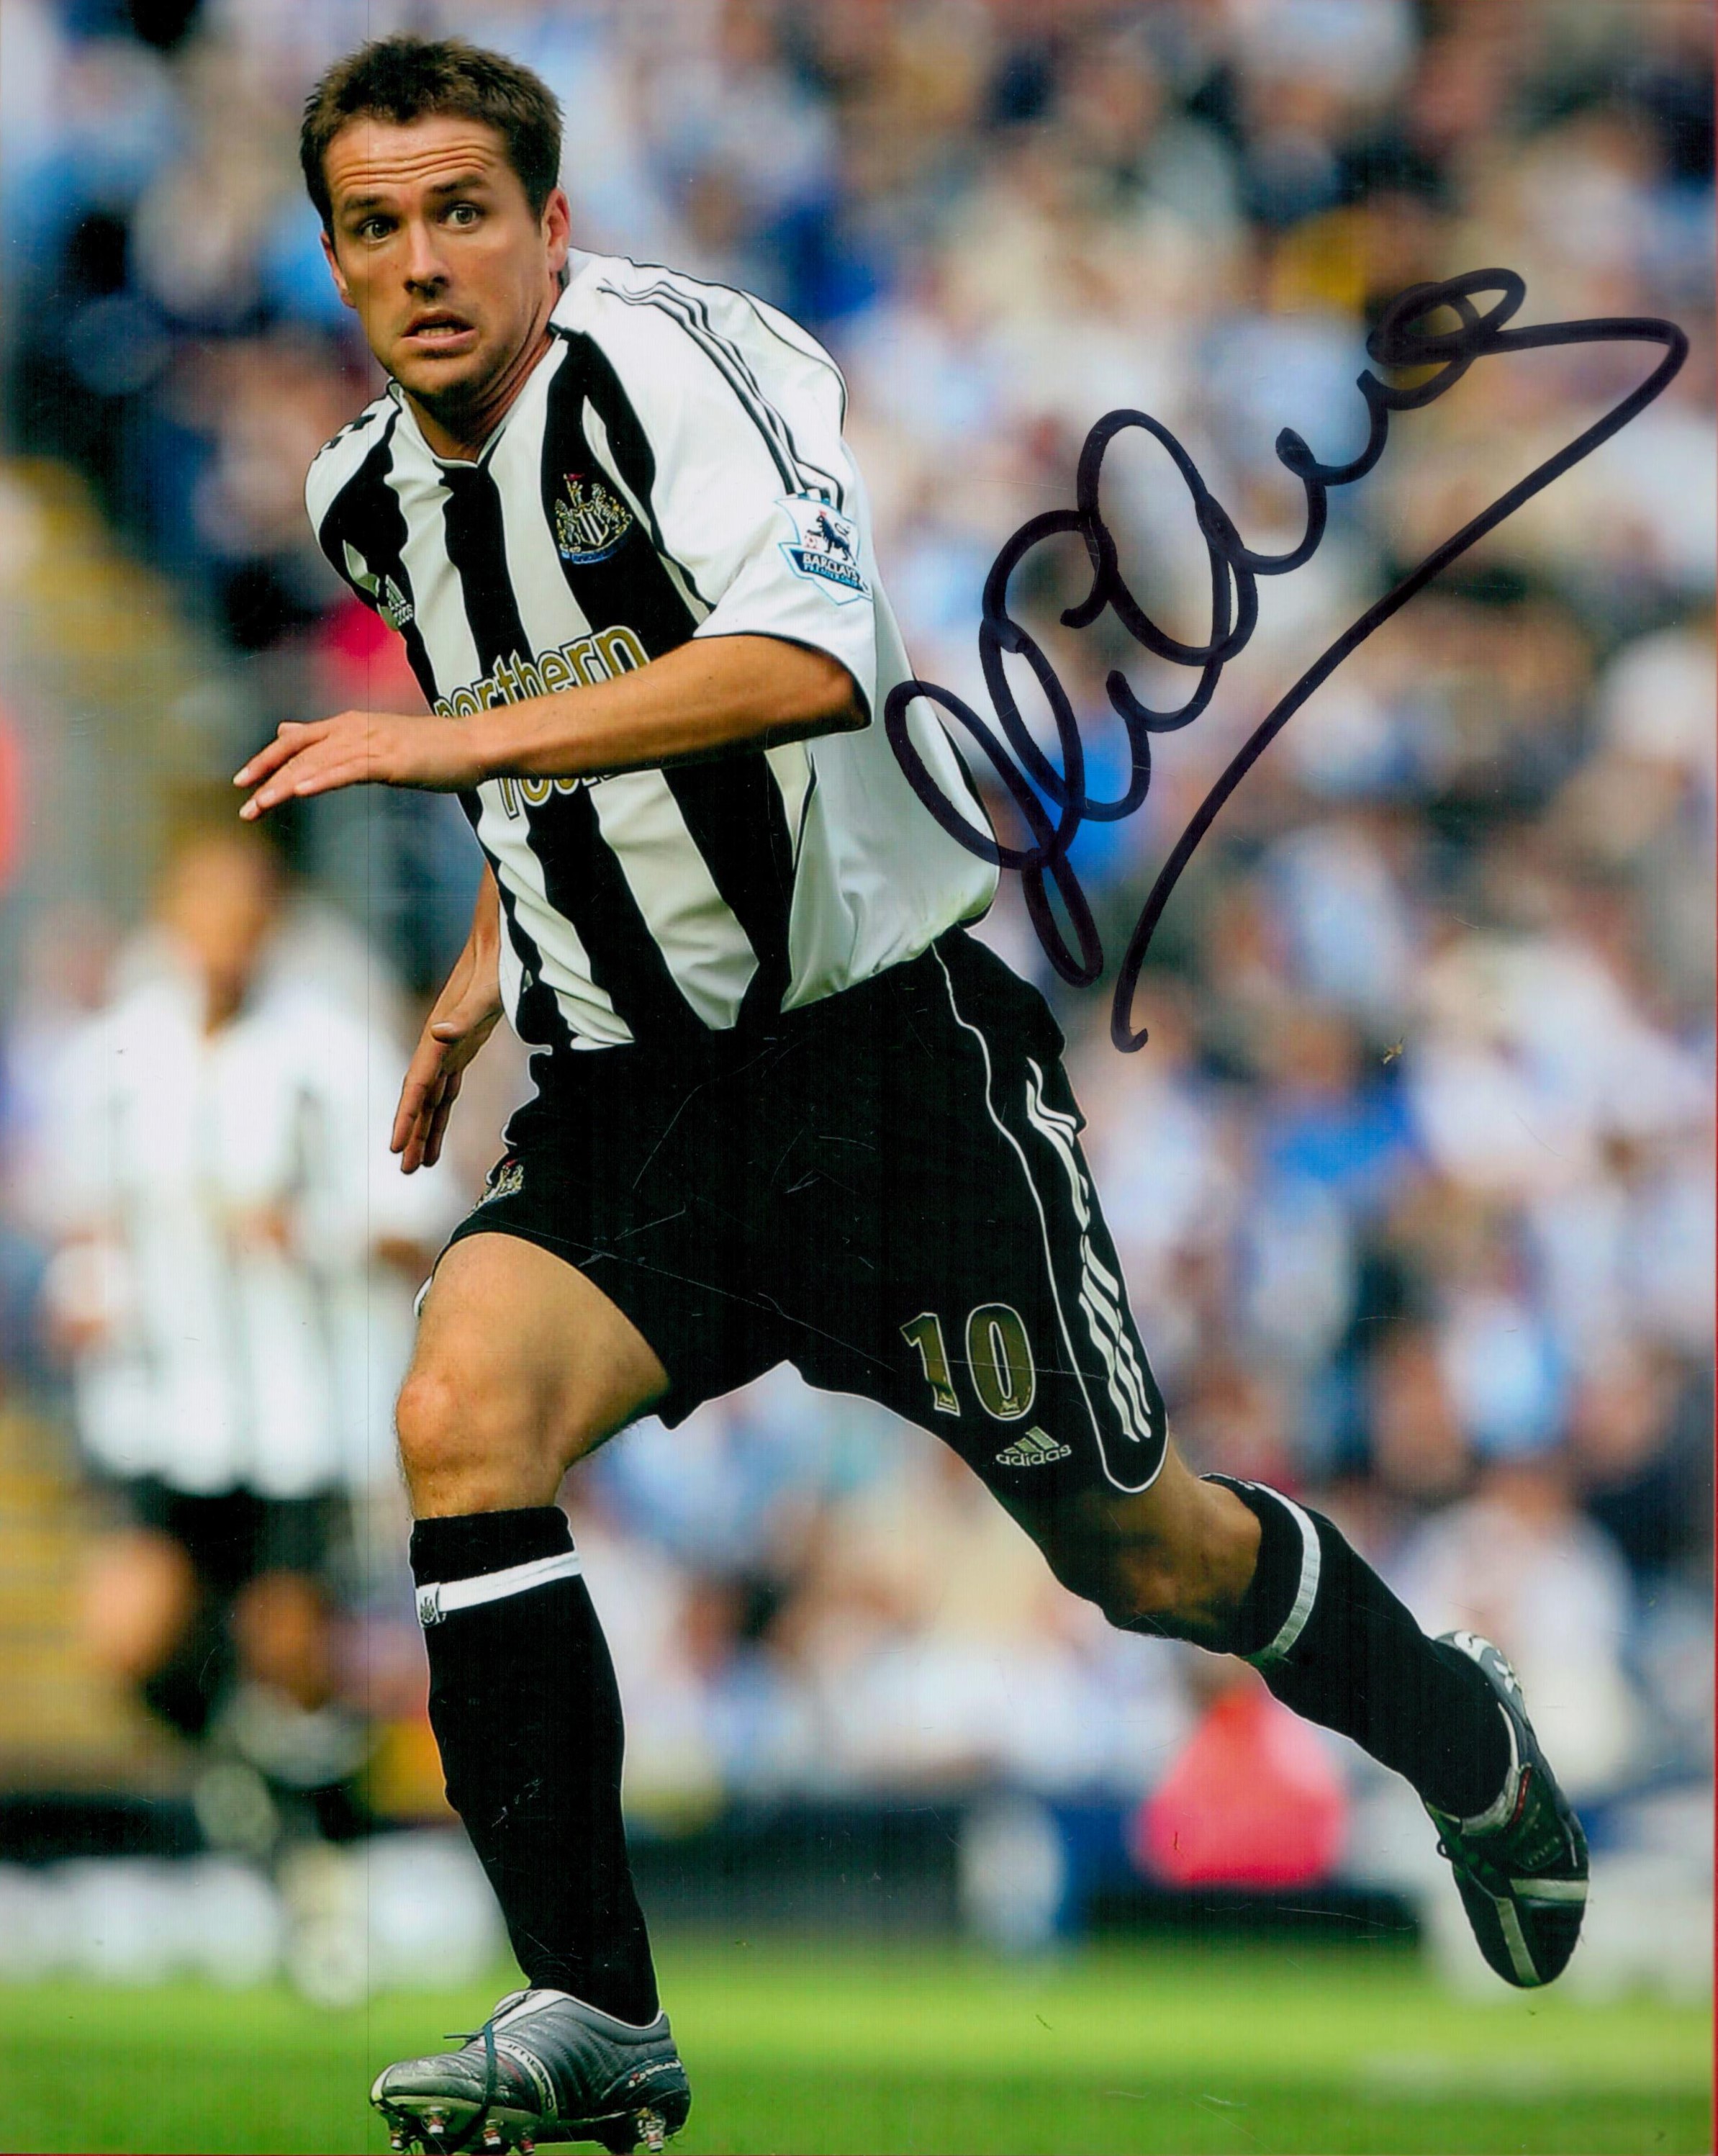 Former Newcastle Star Michael Owen Signed 10x8 inch Colour Newcastle Utd FC Photo. Good condition.